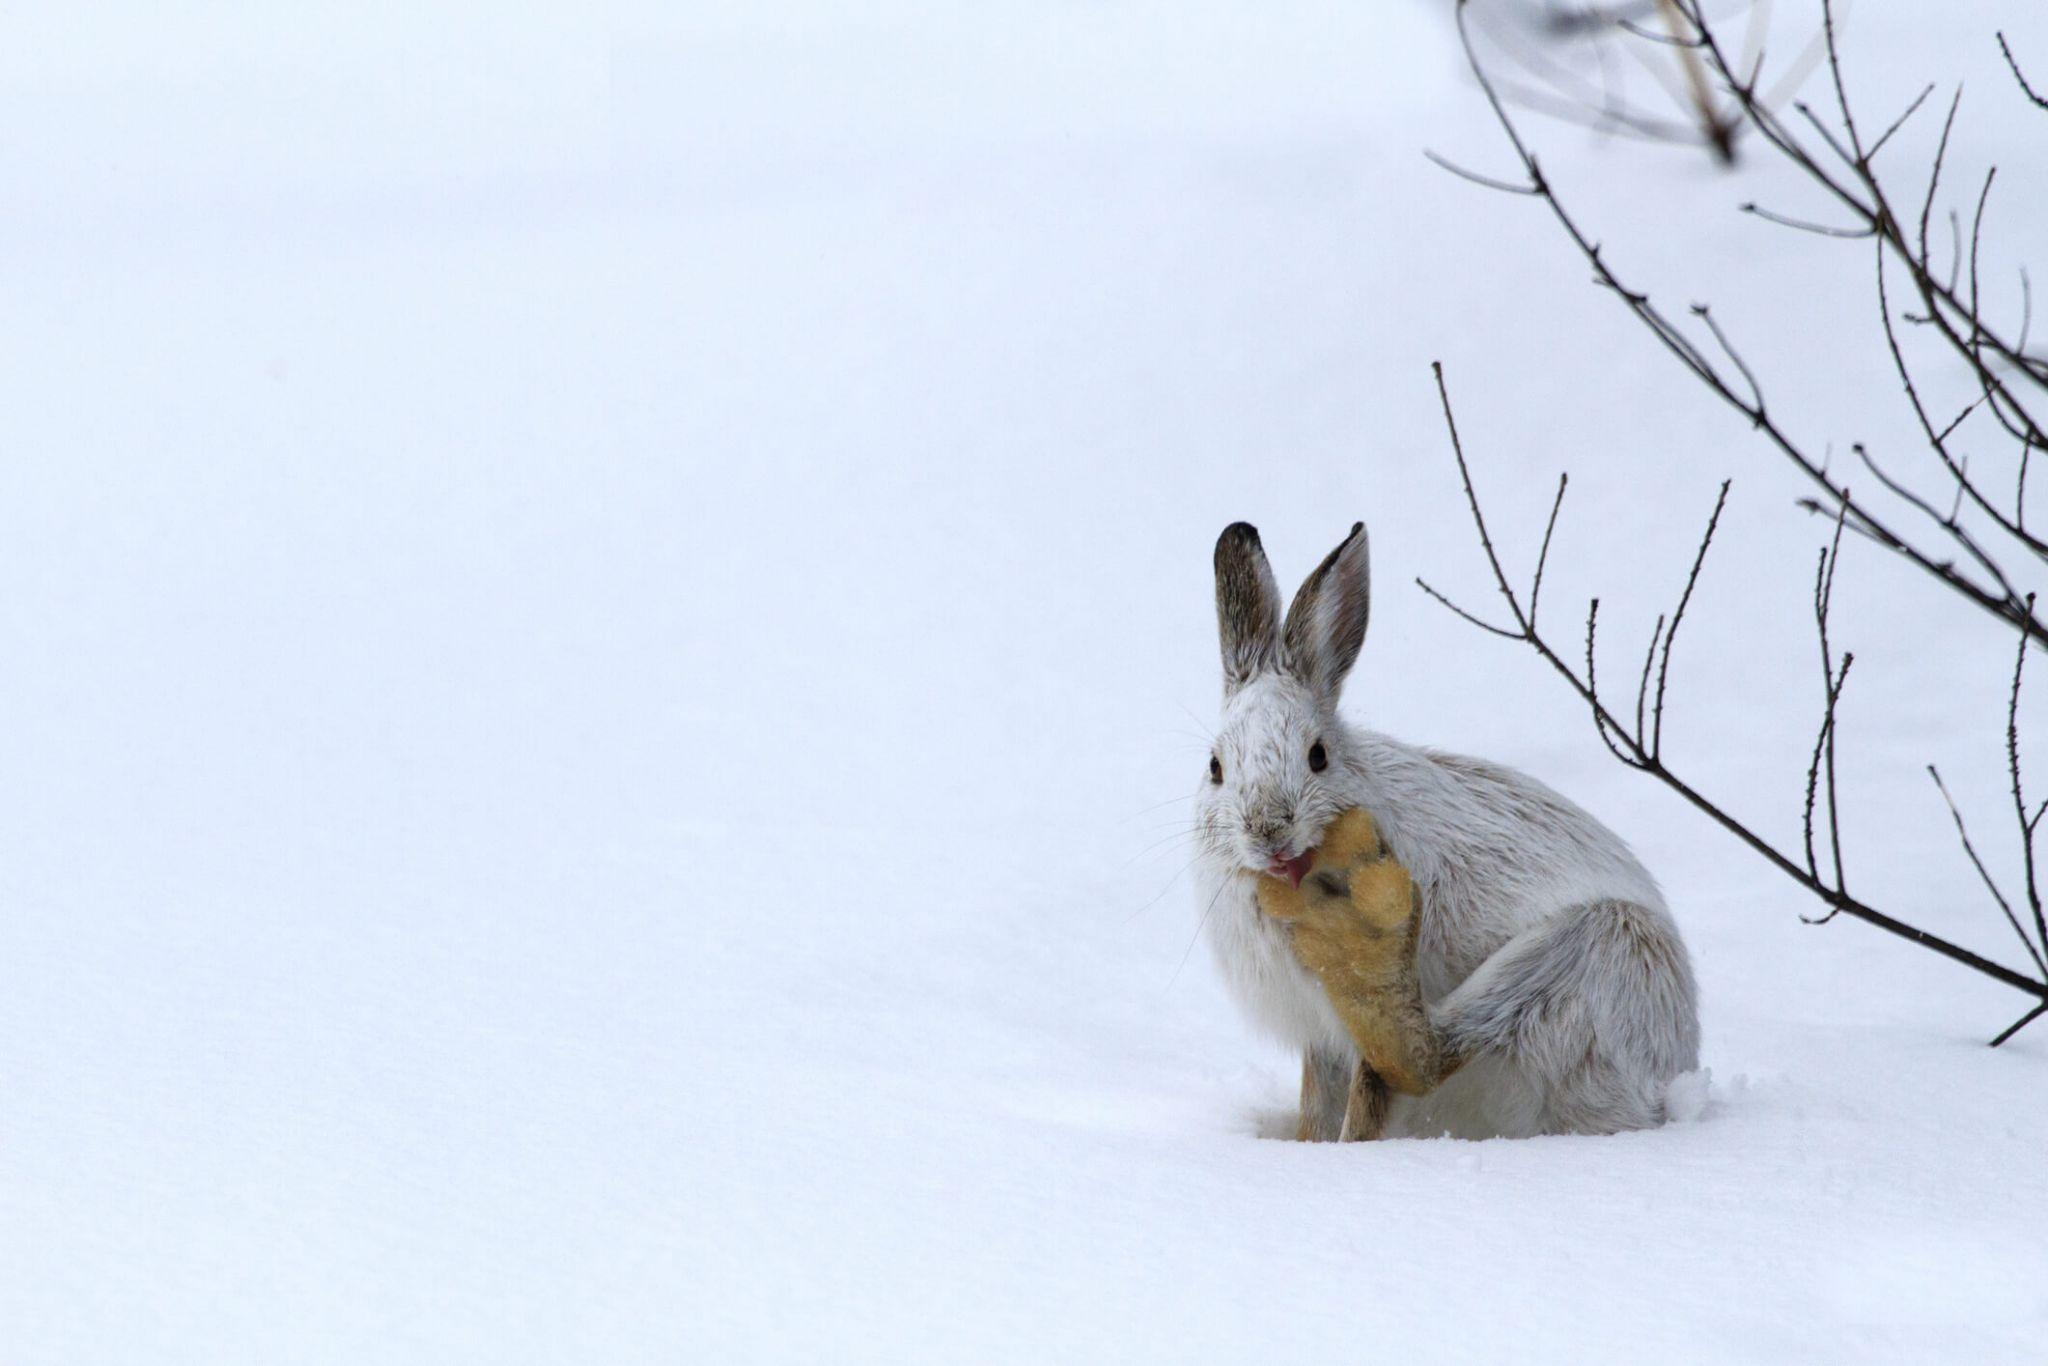 A snowshoe hare in the snow